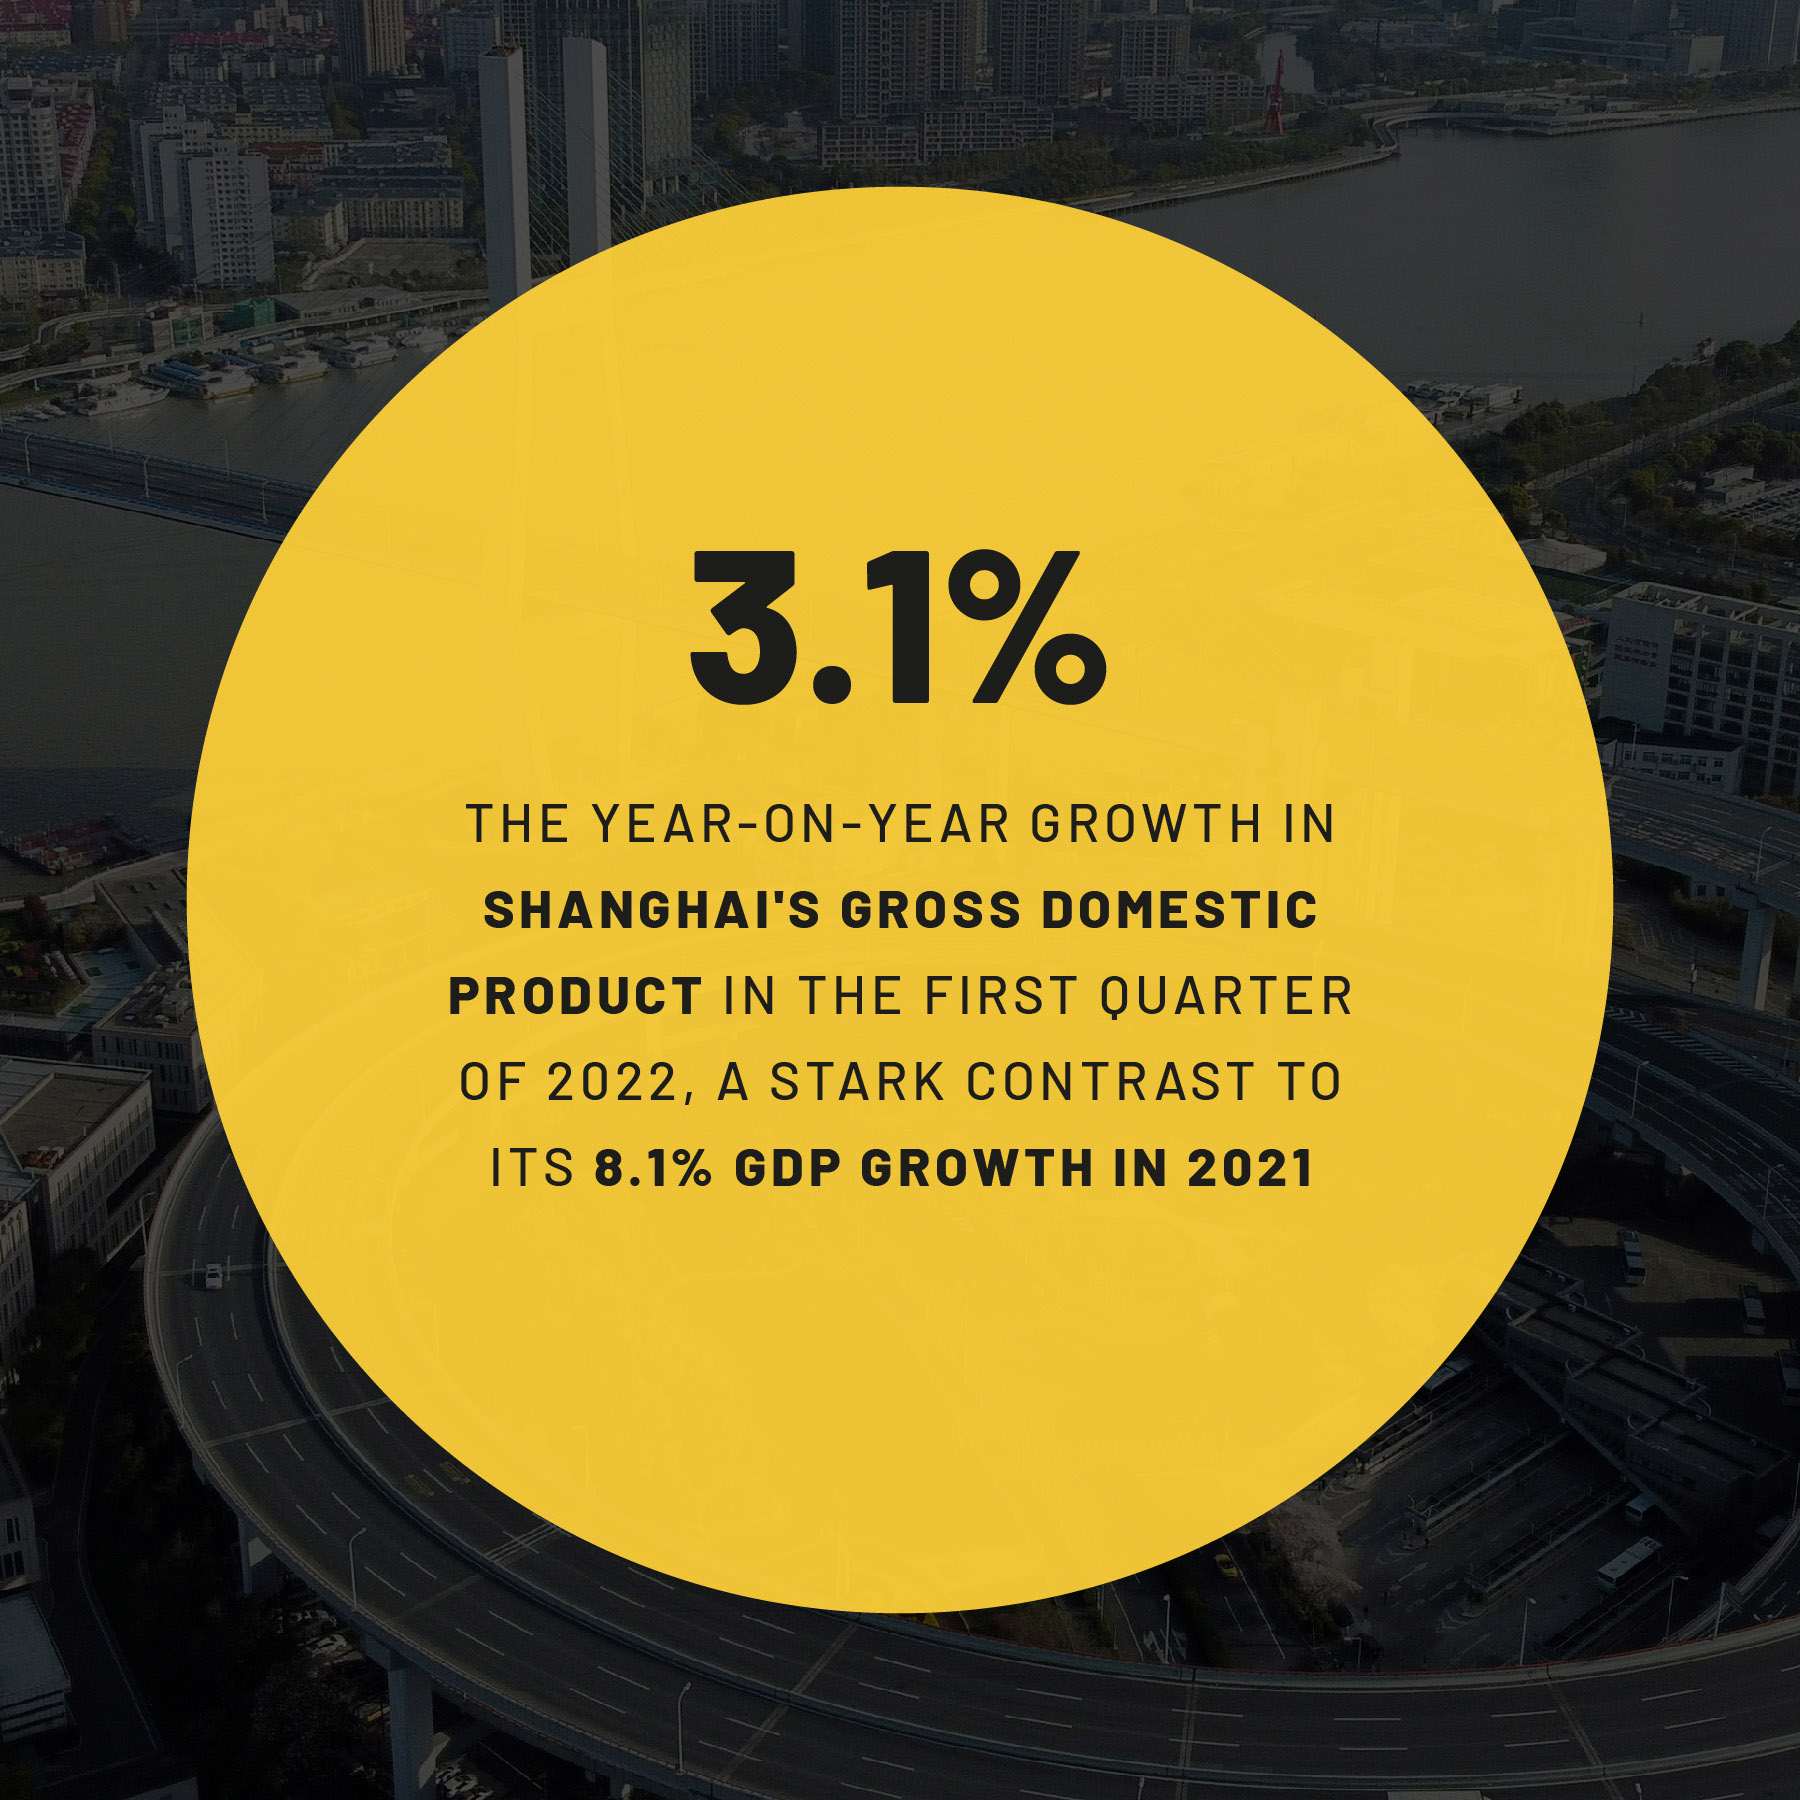 Infographic on the year-on-year growth in Shanghai's gross domestic product in the first quarter of 2022